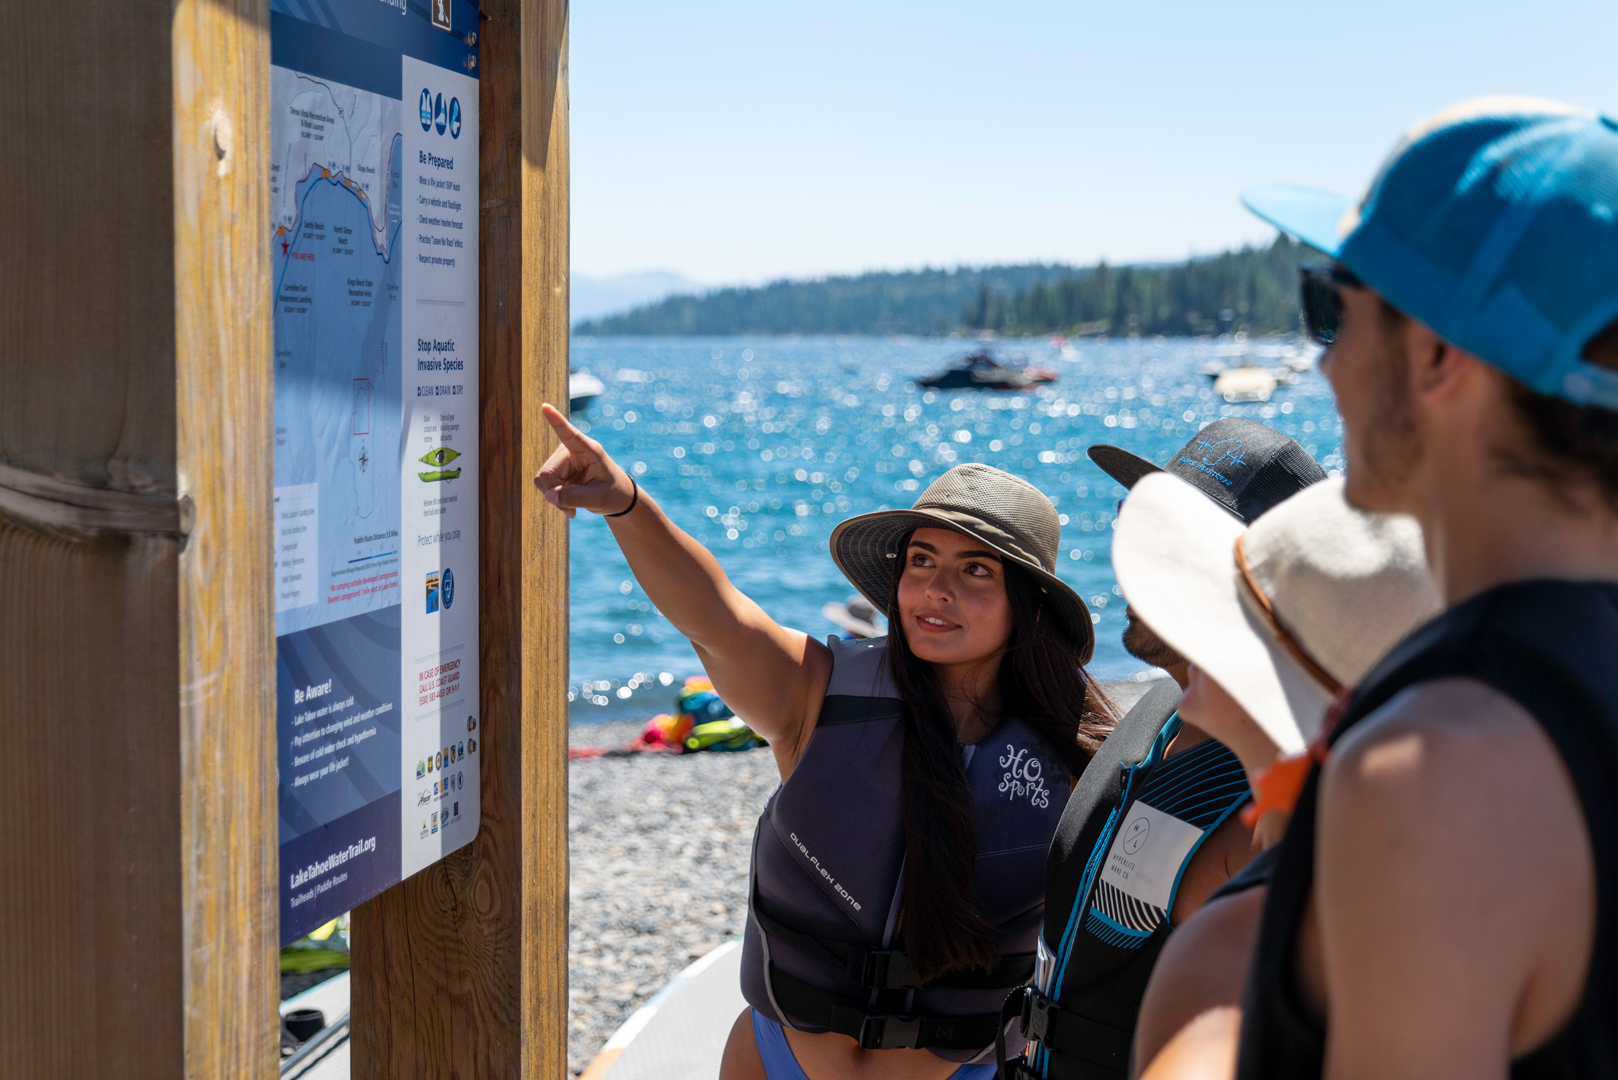 A group of friends looking at the Lake Tahoe Water Trail head sign